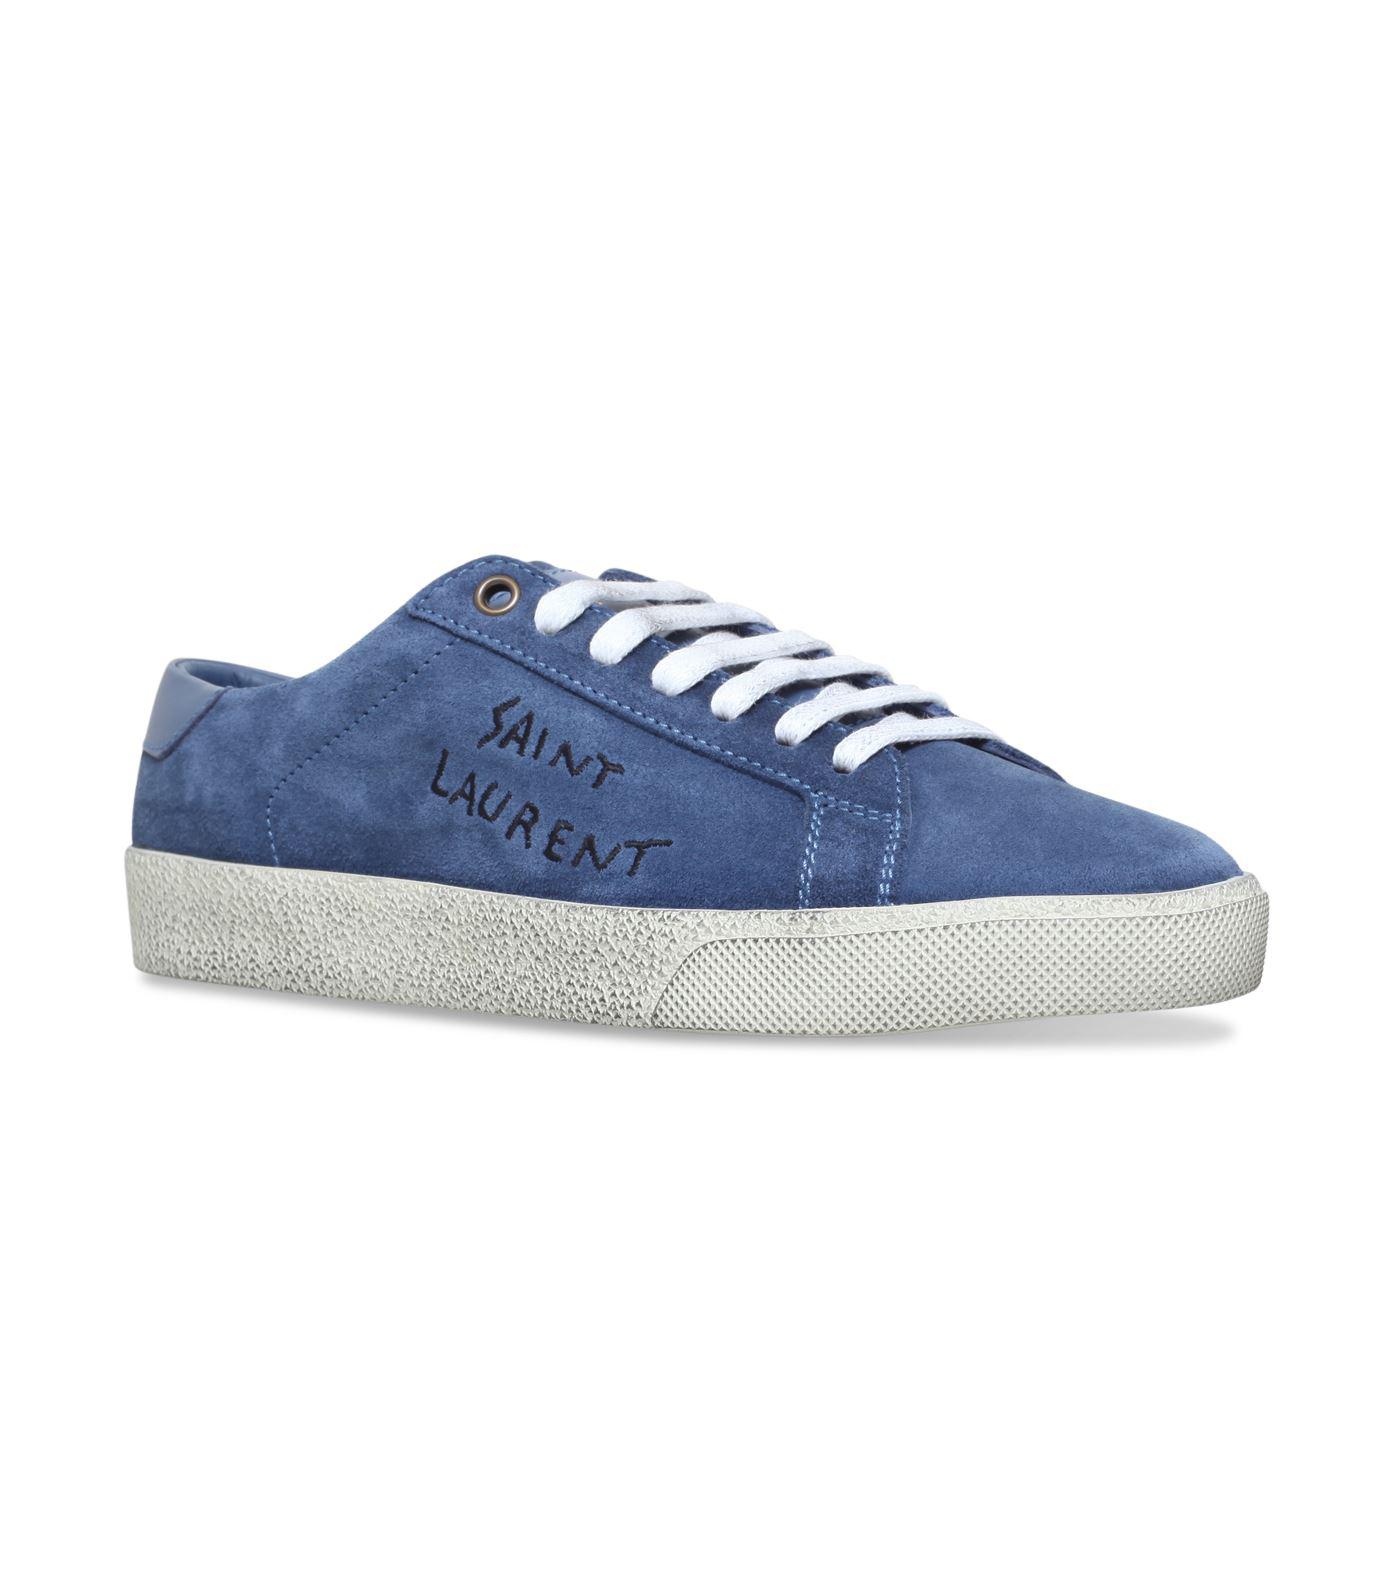 Saint Laurent Suede Court Classic Sneakers in Blue | Lyst